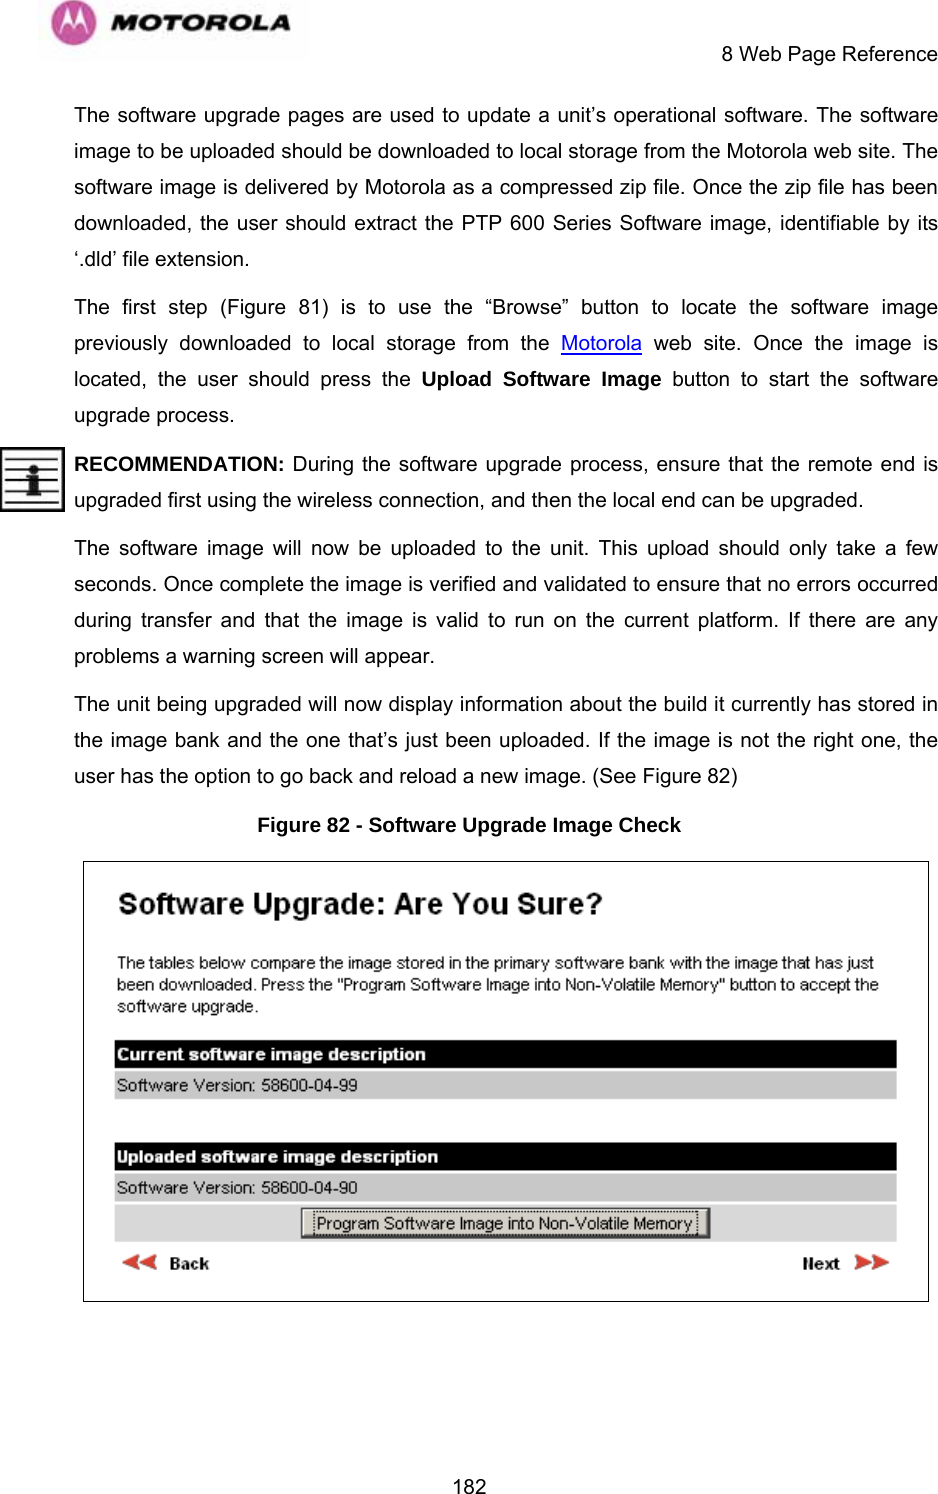     8 Web Page Reference  182The software upgrade pages are used to update a unit’s operational software. The software image to be uploaded should be downloaded to local storage from the Motorola web site. The software image is delivered by Motorola as a compressed zip file. Once the zip file has been downloaded, the user should extract the PTP 600 Series Software image, identifiable by its ‘.dld’ file extension. The first step (Figure 81) is to use the “Browse” button to locate the software image previously downloaded to local storage from the Motorola web site. Once the image is located, the user should press the Upload Software Image button to start the software upgrade process.  RECOMMENDATION: During the software upgrade process, ensure that the remote end is upgraded first using the wireless connection, and then the local end can be upgraded. The software image will now be uploaded to the unit. This upload should only take a few seconds. Once complete the image is verified and validated to ensure that no errors occurred during transfer and that the image is valid to run on the current platform. If there are any problems a warning screen will appear.  The unit being upgraded will now display information about the build it currently has stored in the image bank and the one that’s just been uploaded. If the image is not the right one, the user has the option to go back and reload a new image. (See Figure 82)  Figure 82 - Software Upgrade Image Check  